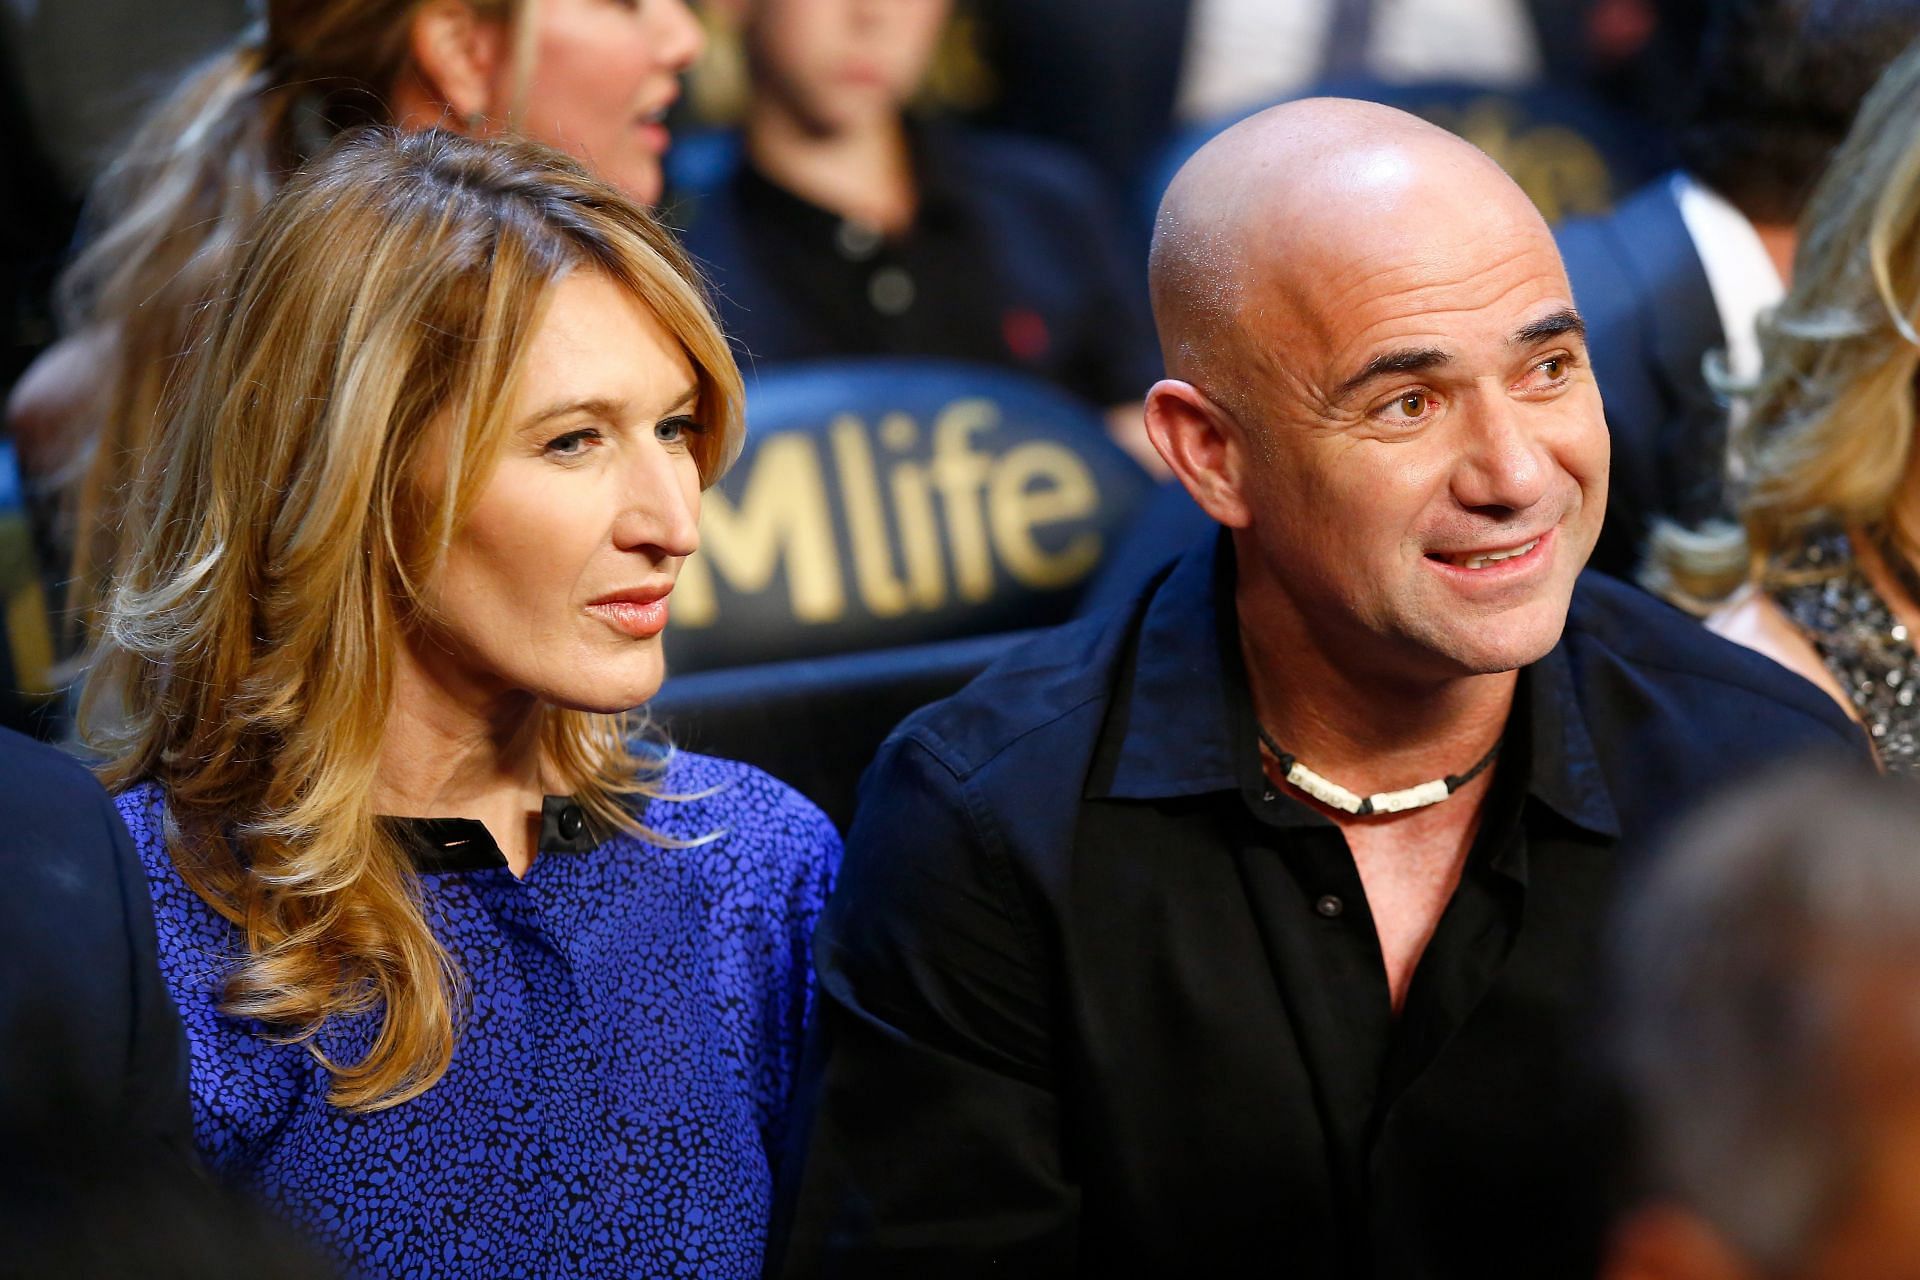 Andre Agassi (R) and Steffi Graf (L)